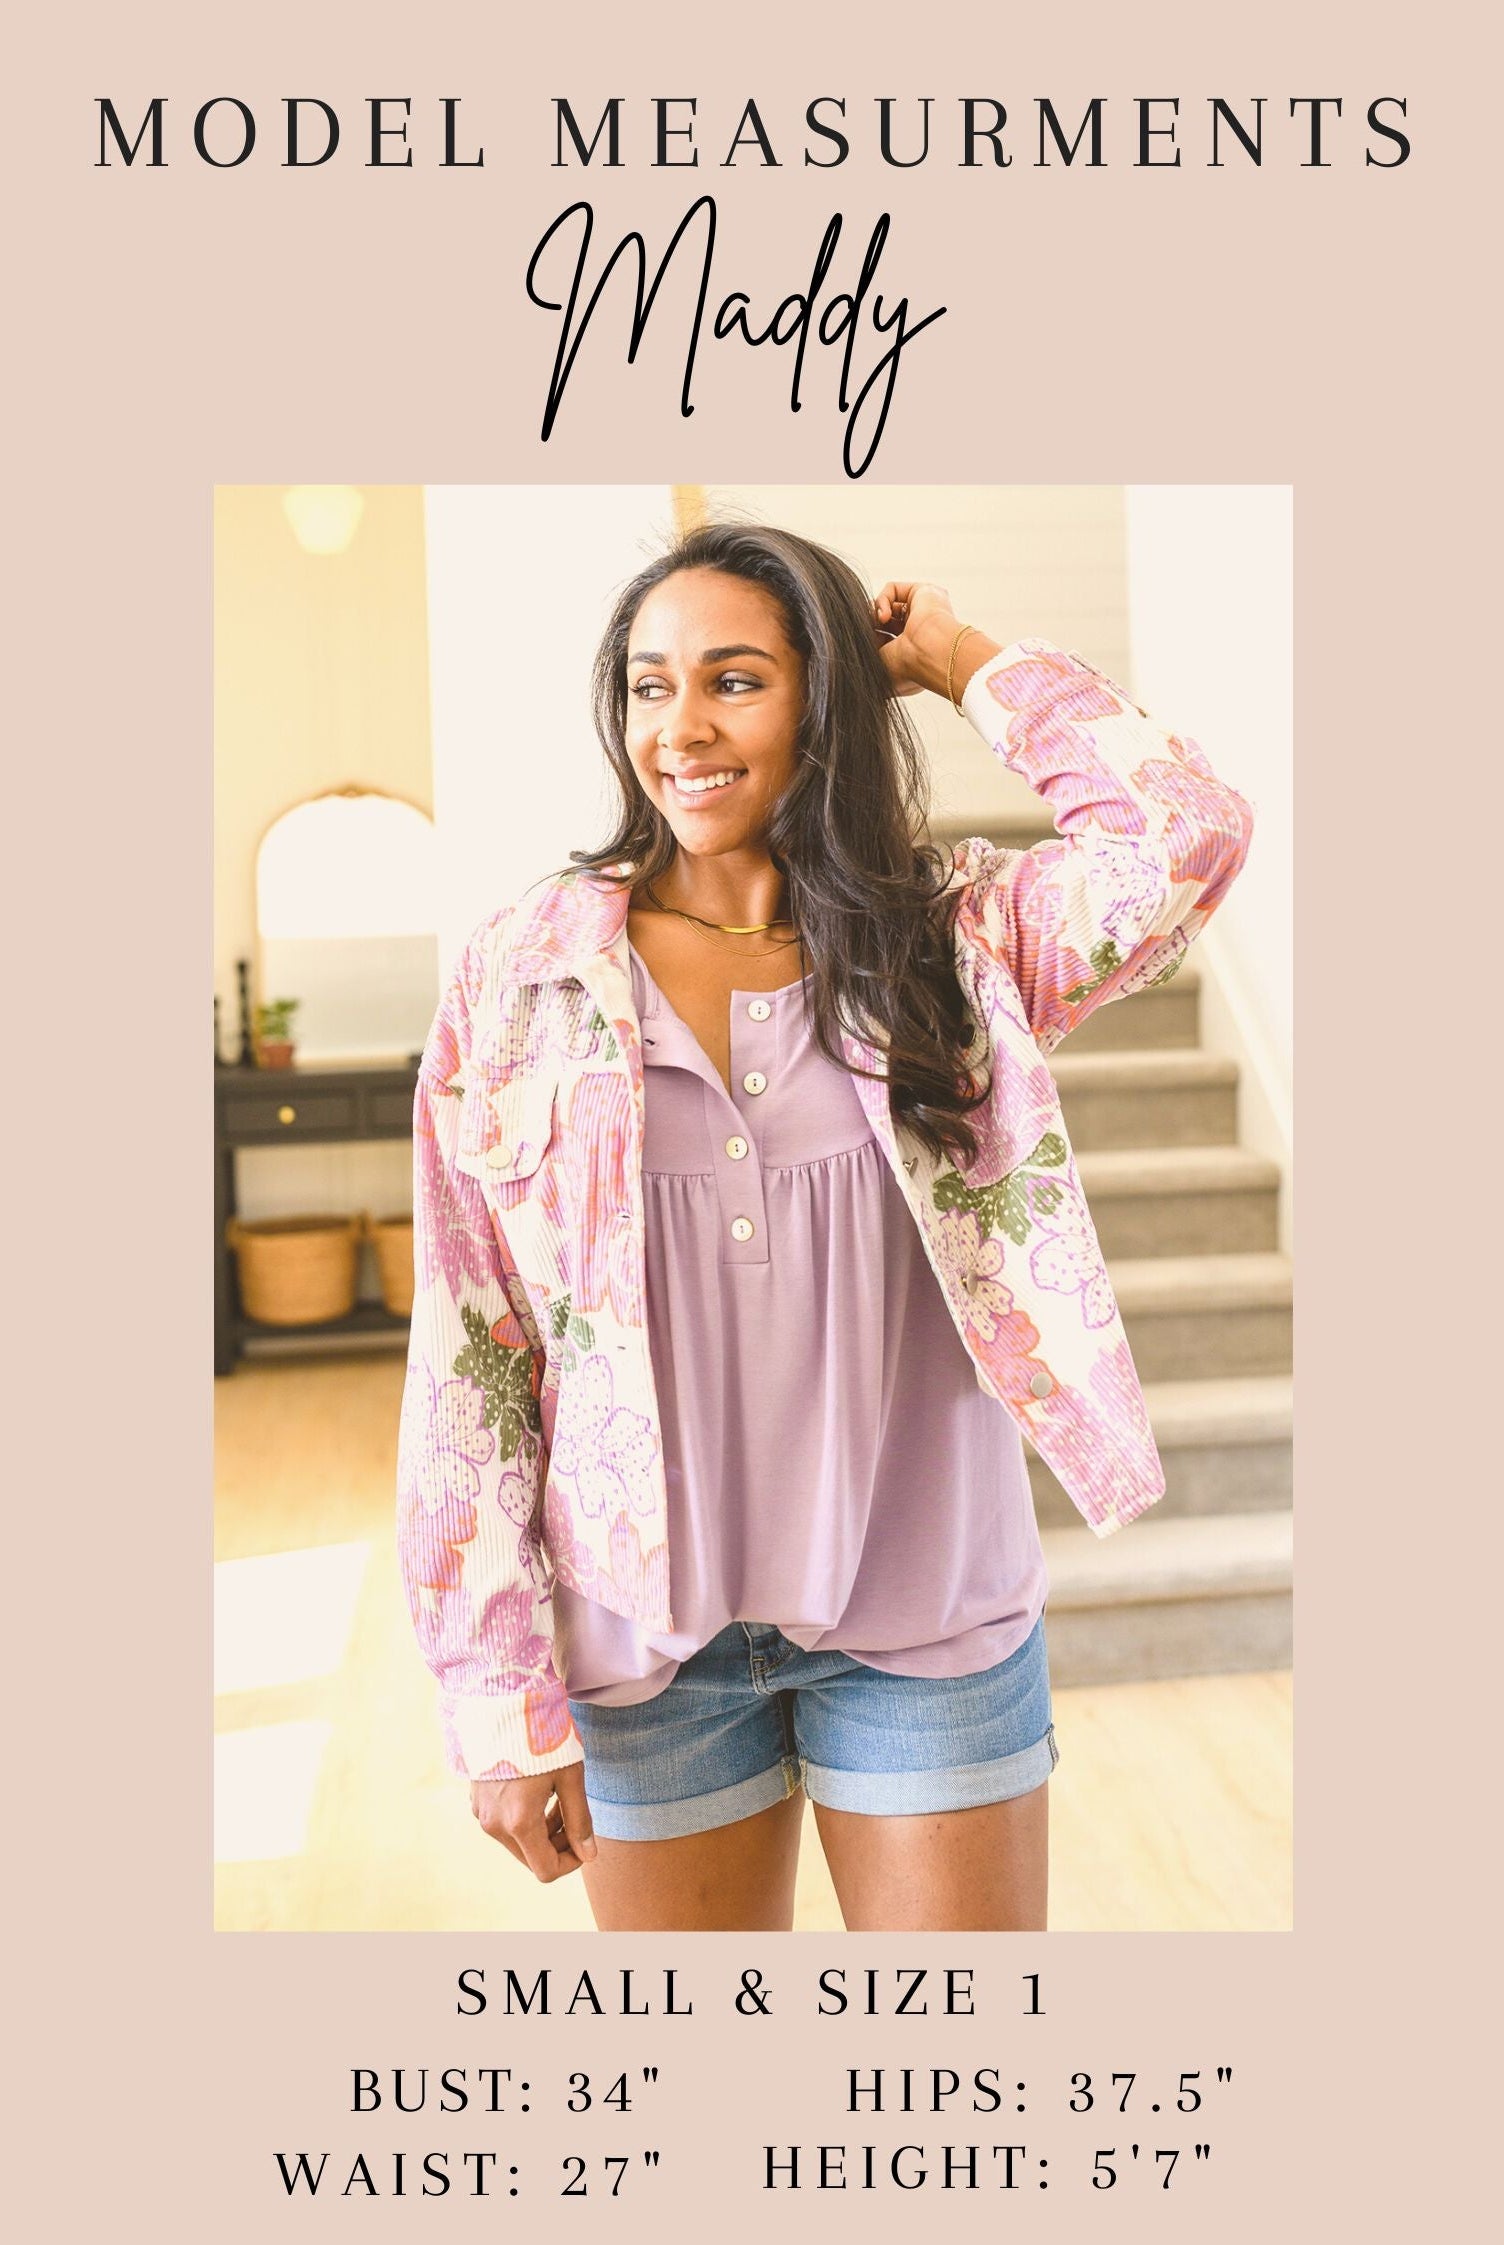 Spring Haiku Floral Blouse-Short Sleeves- Simply Simpson's Boutique is a Women's Online Fashion Boutique Located in Jupiter, Florida